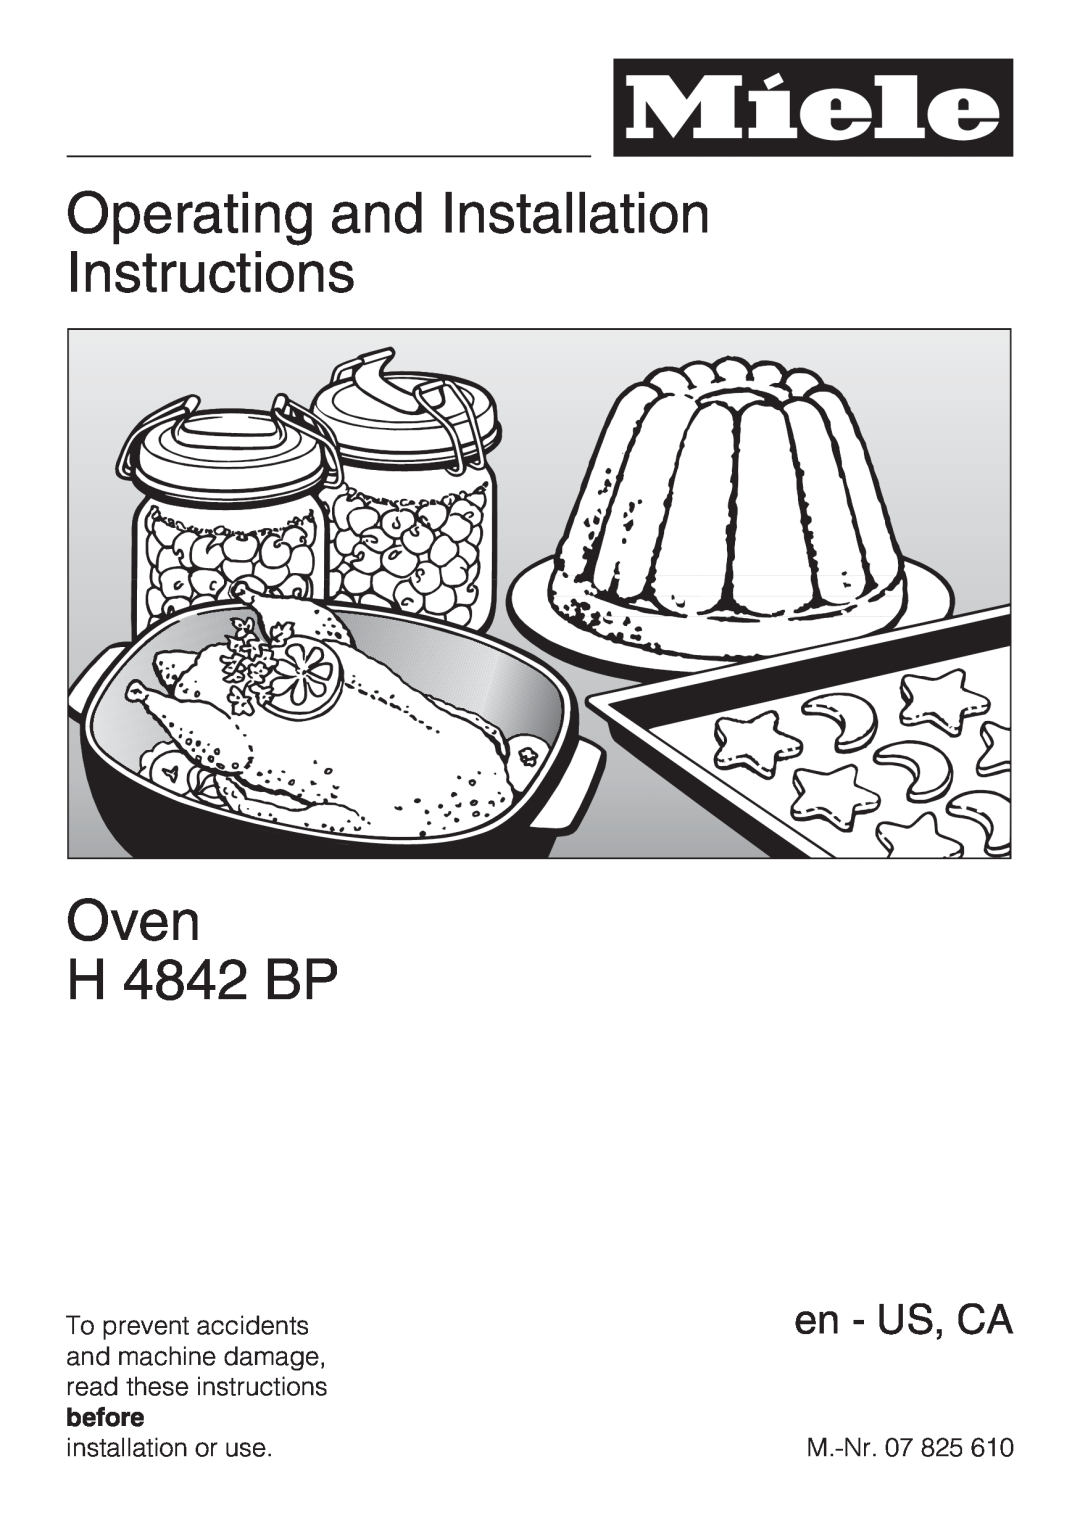 Miele H4842BP installation instructions Operating and Installation Instructions Oven, H 4842 BP, en - US, CA 